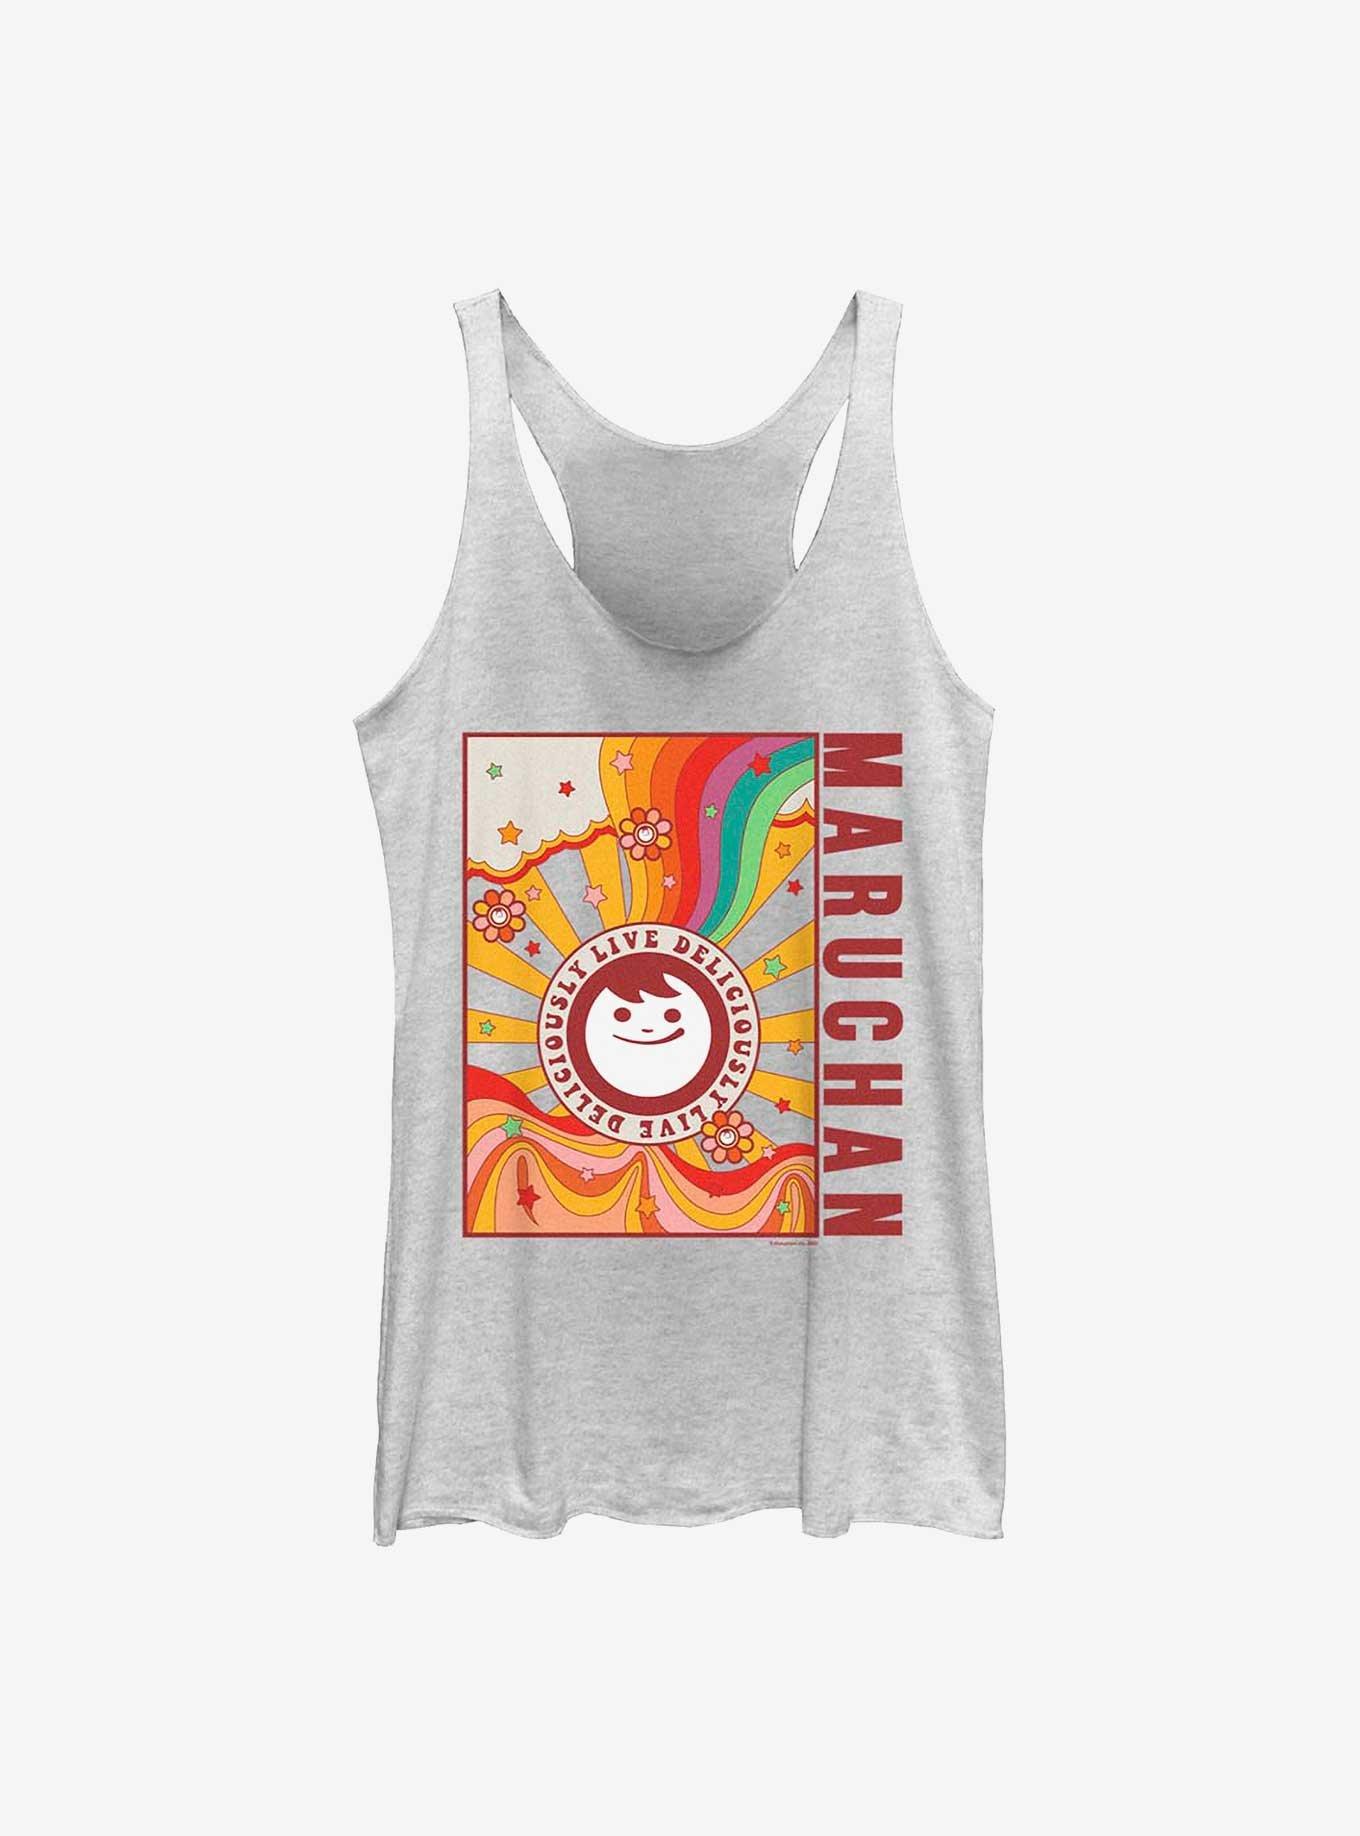 Maruchan Live Deliciously Girls Tank, WHITE HTR, hi-res